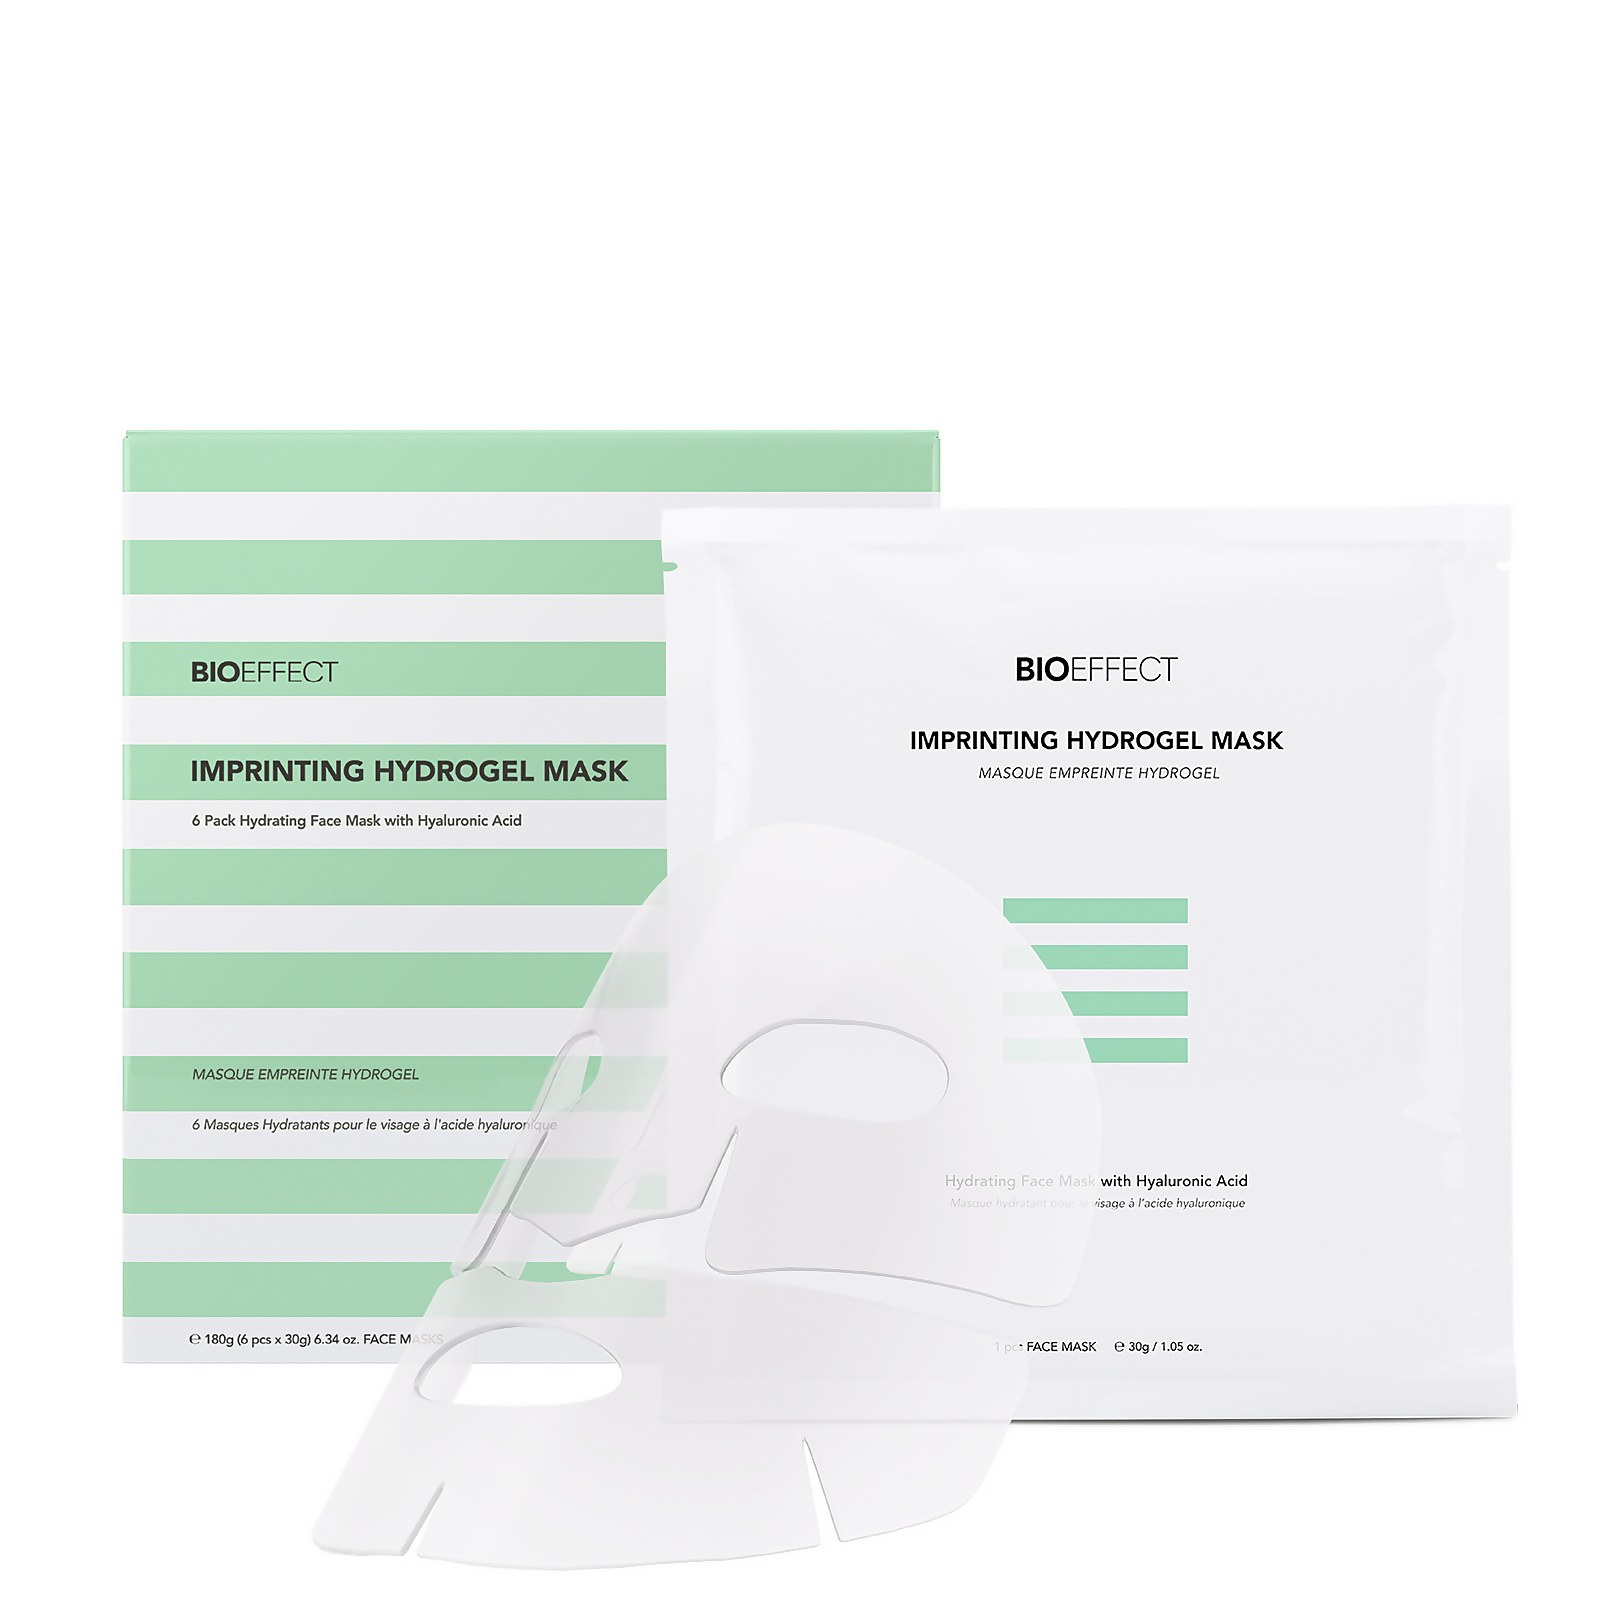 BIOEFFECT Imprinting Hydrogel Mask 150g Pack of 6 (Worth PS70.00)